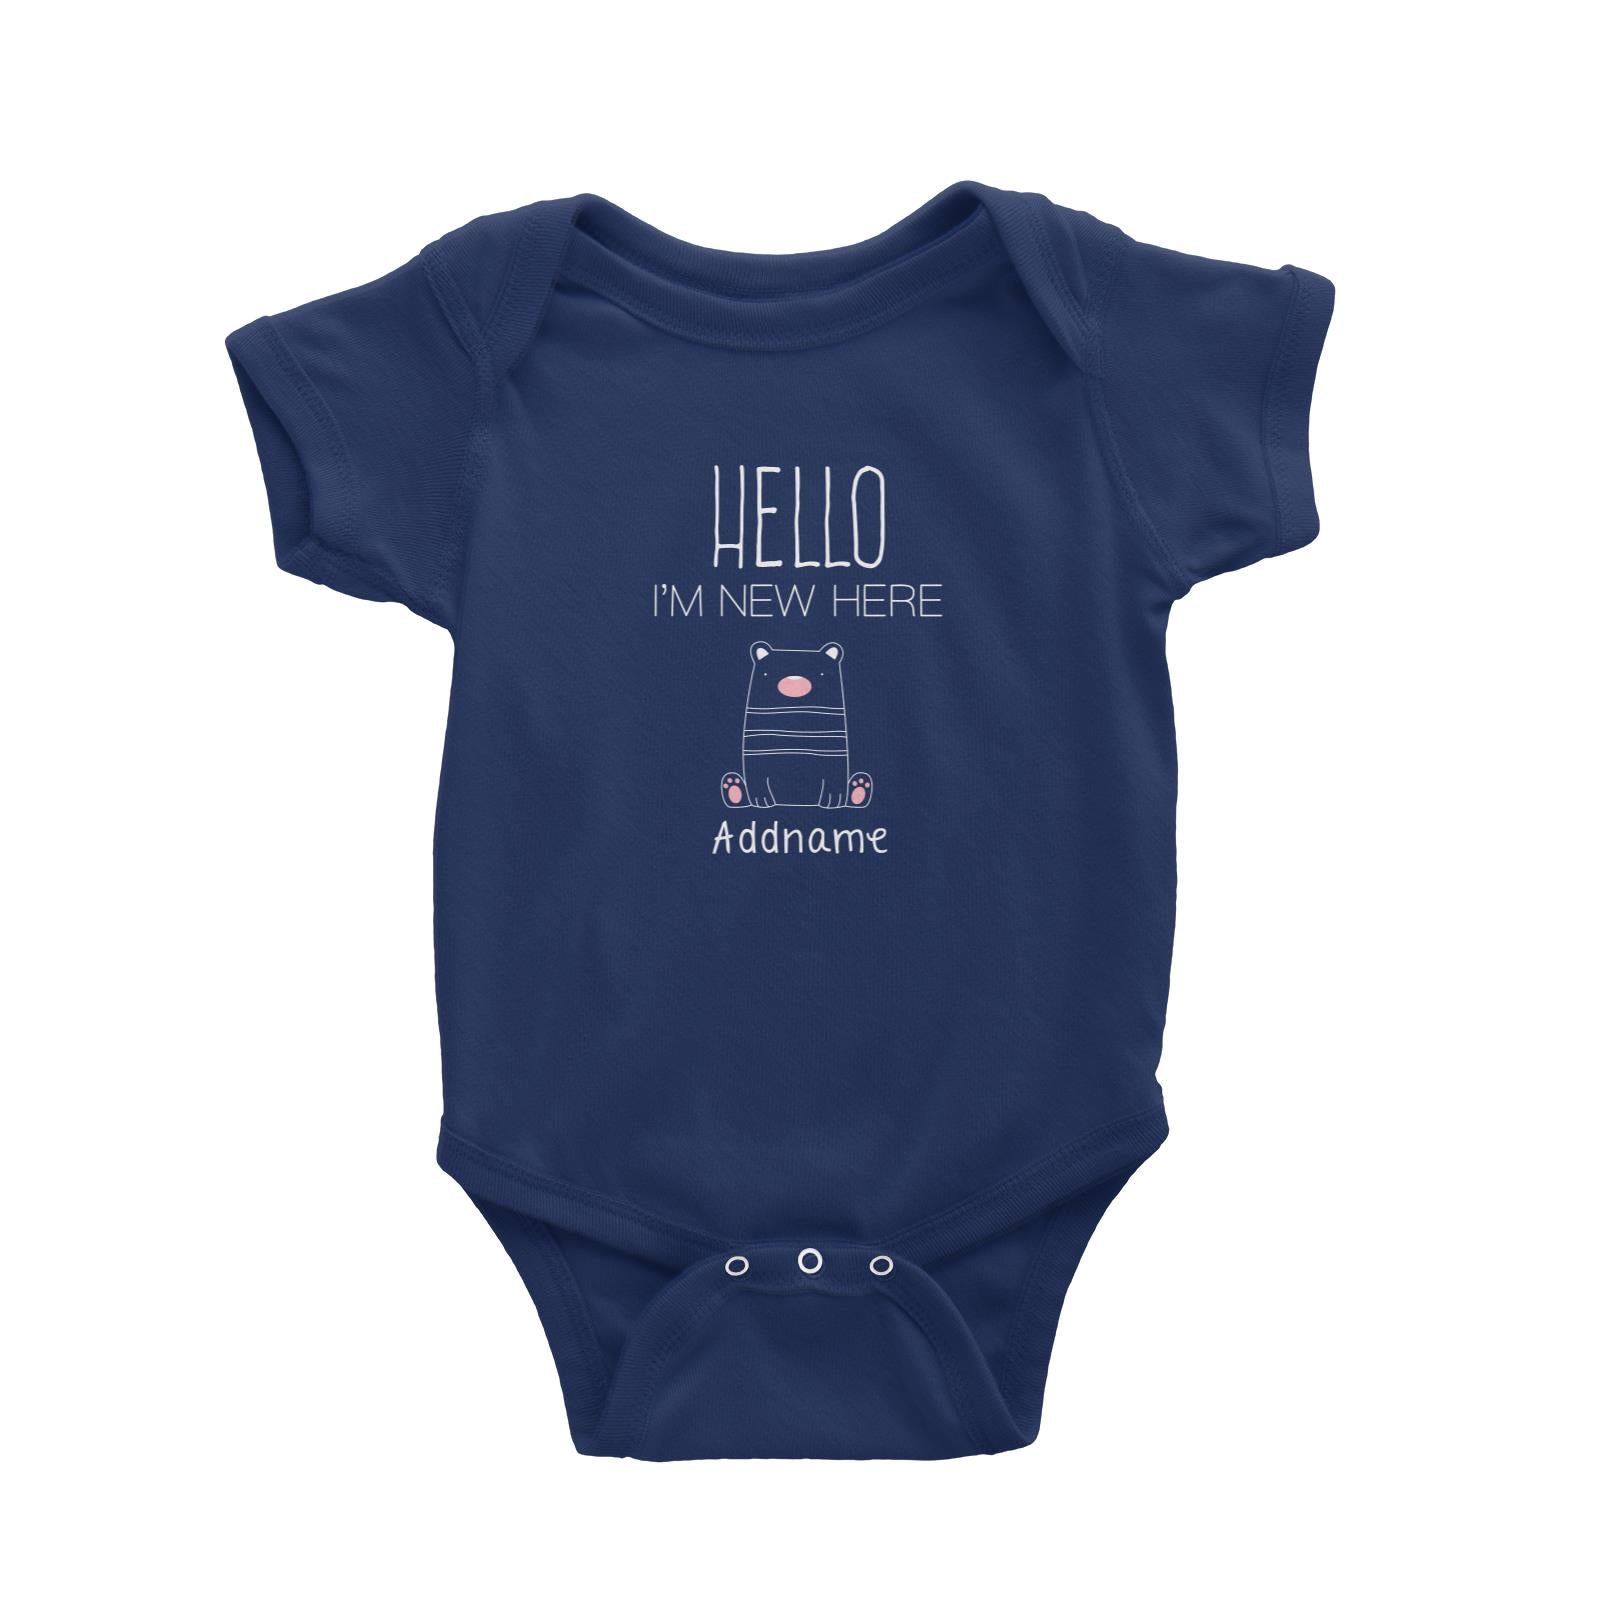 Cute Animals and Friends Series 2 Bear Hello I'm New Here Addname Baby Romper